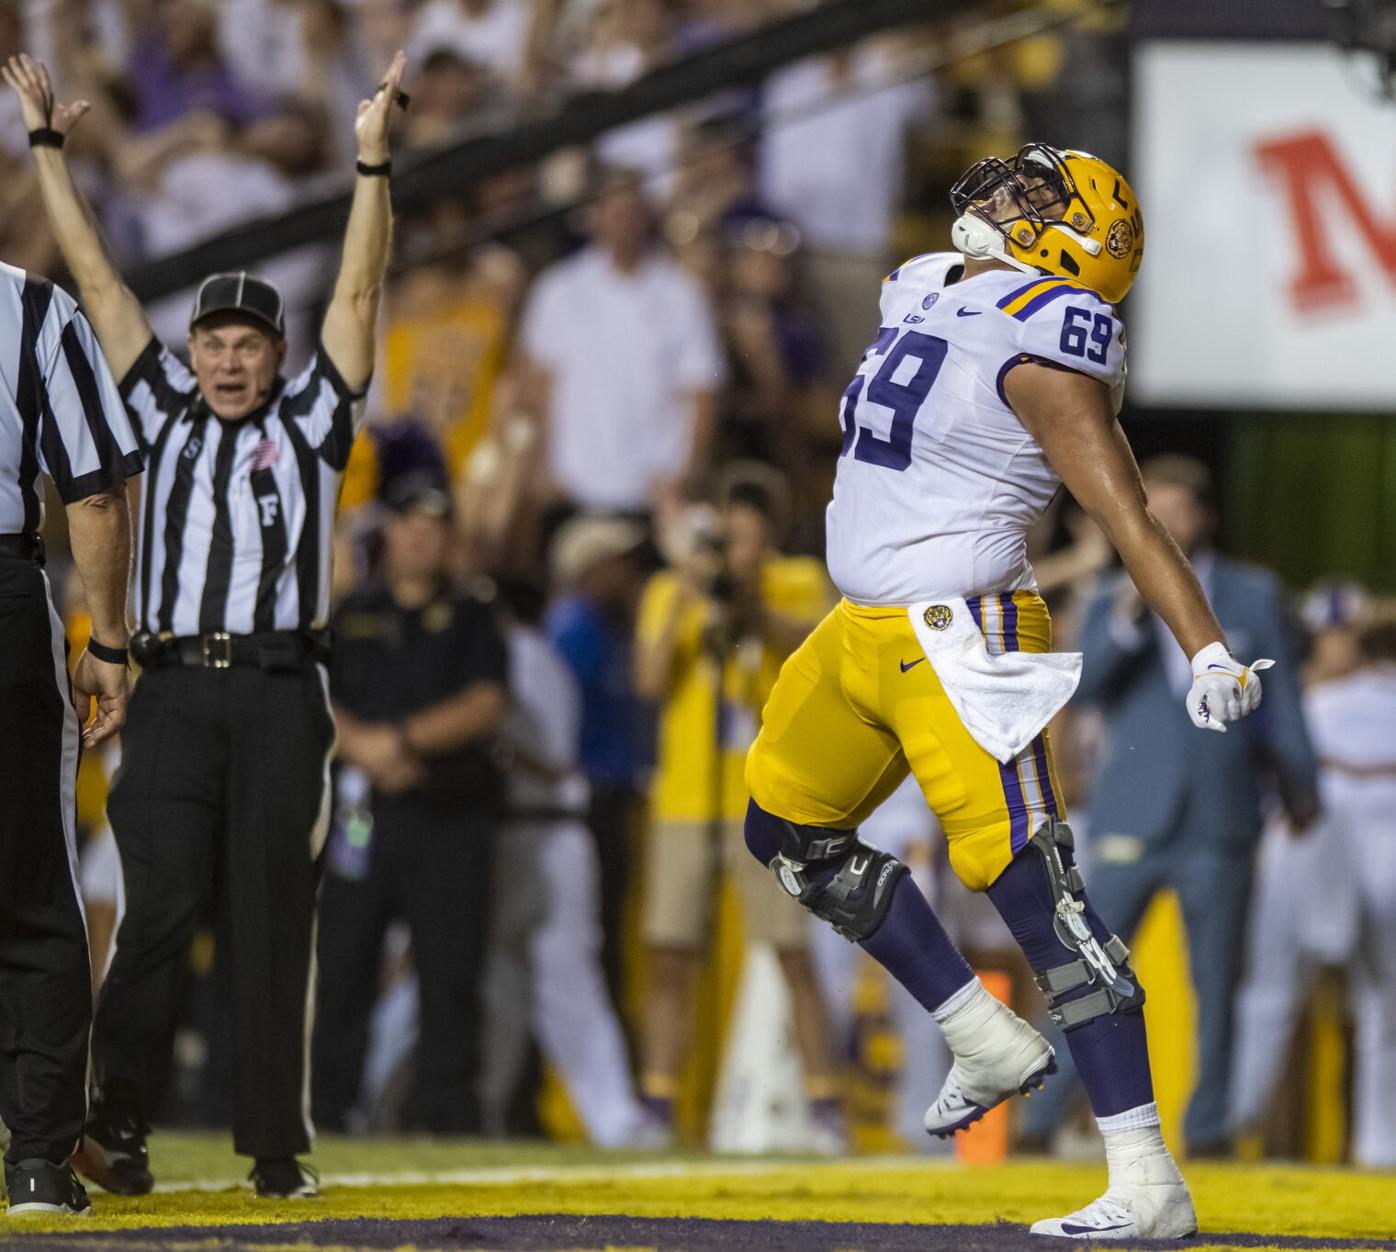 ATVS Roundtable: Best LSU Uniforms - And The Valley Shook